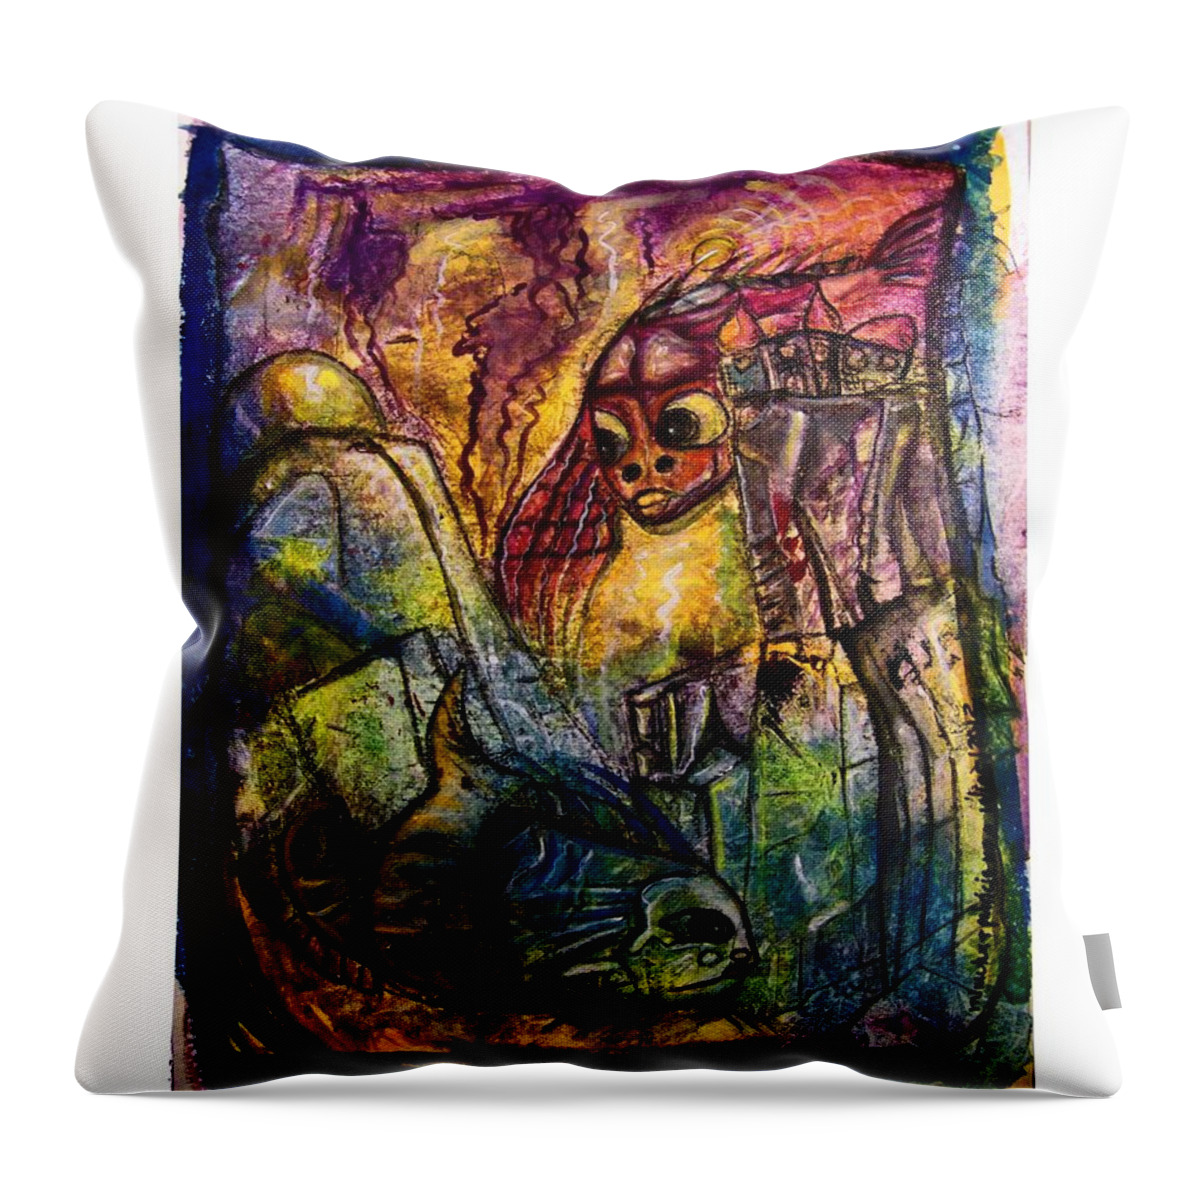 Fish Throw Pillow featuring the painting Fish Kritters by Mimulux Patricia No